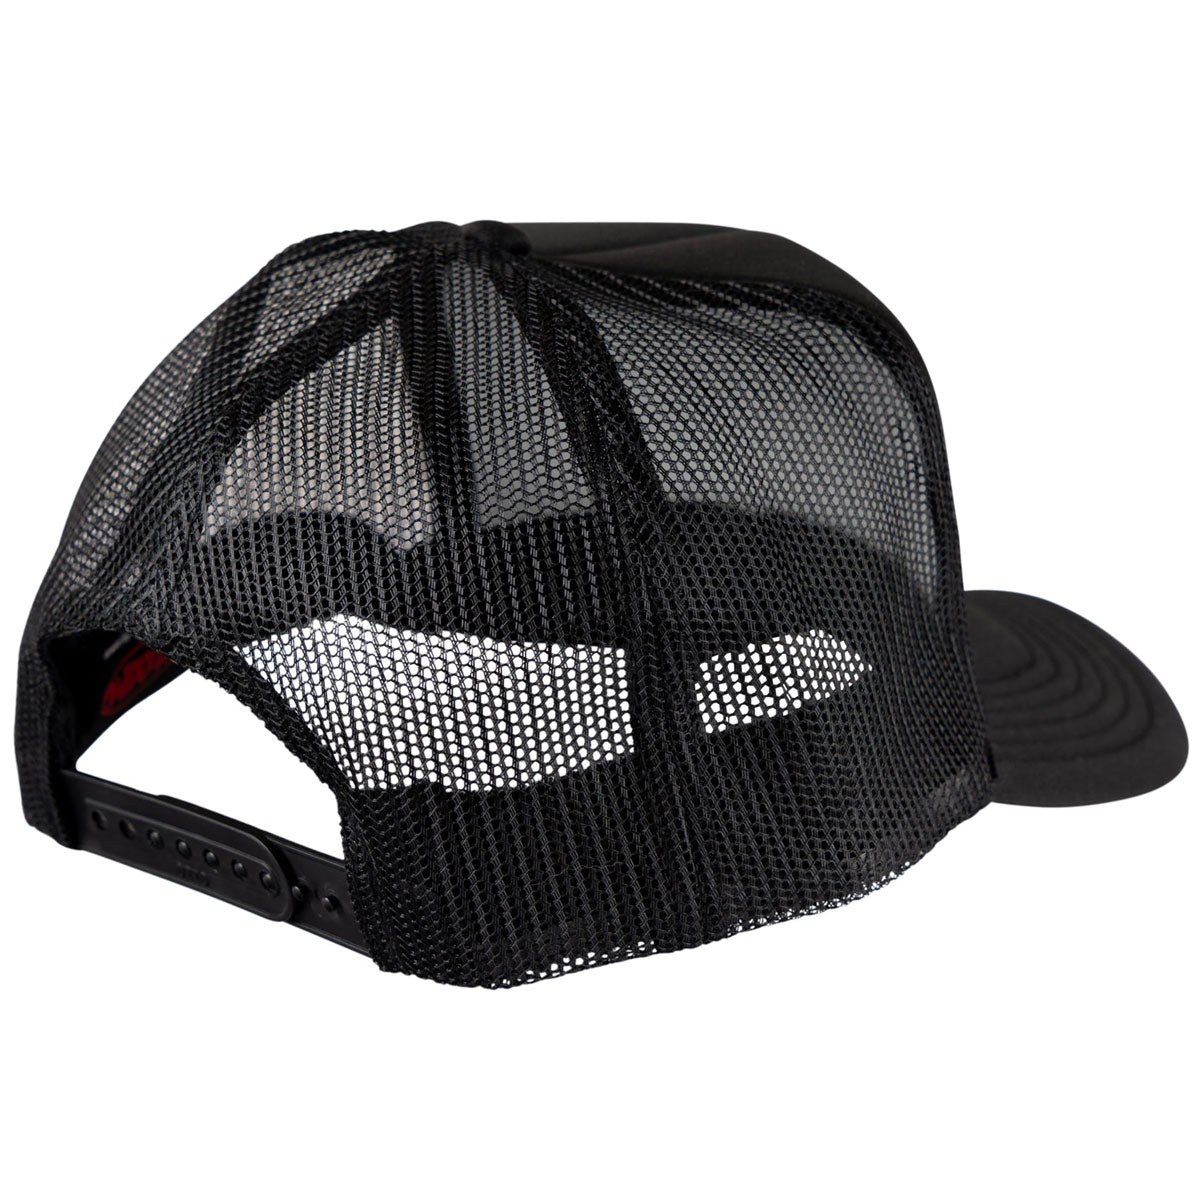 Welcome Mysticality Trucker Hat - Black image 2